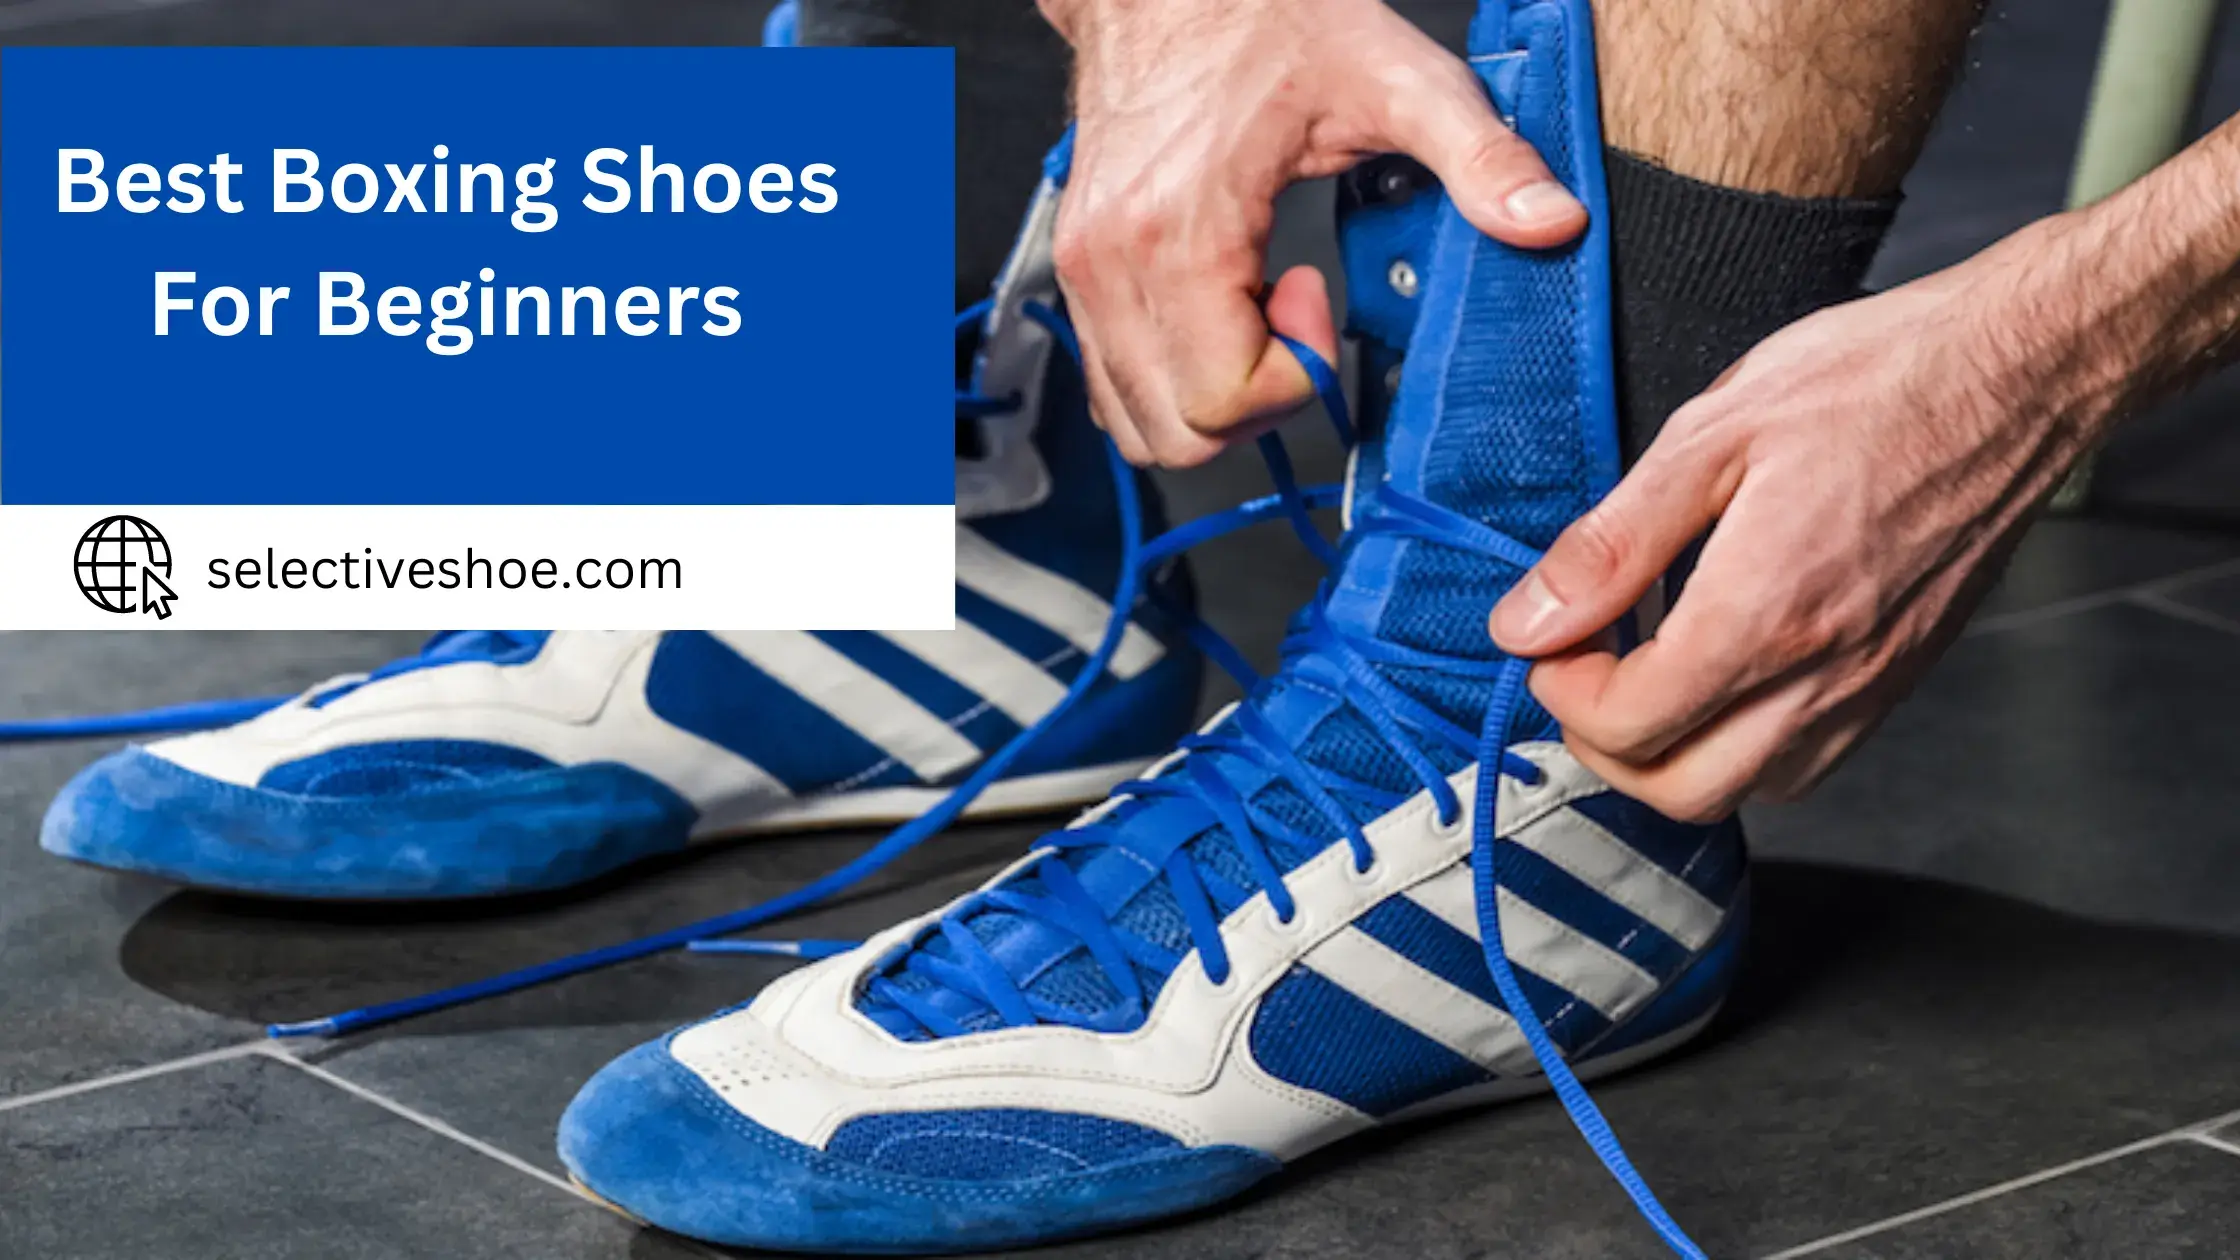 Best Boxing Shoes For Beginners - A Comprehensive Guide